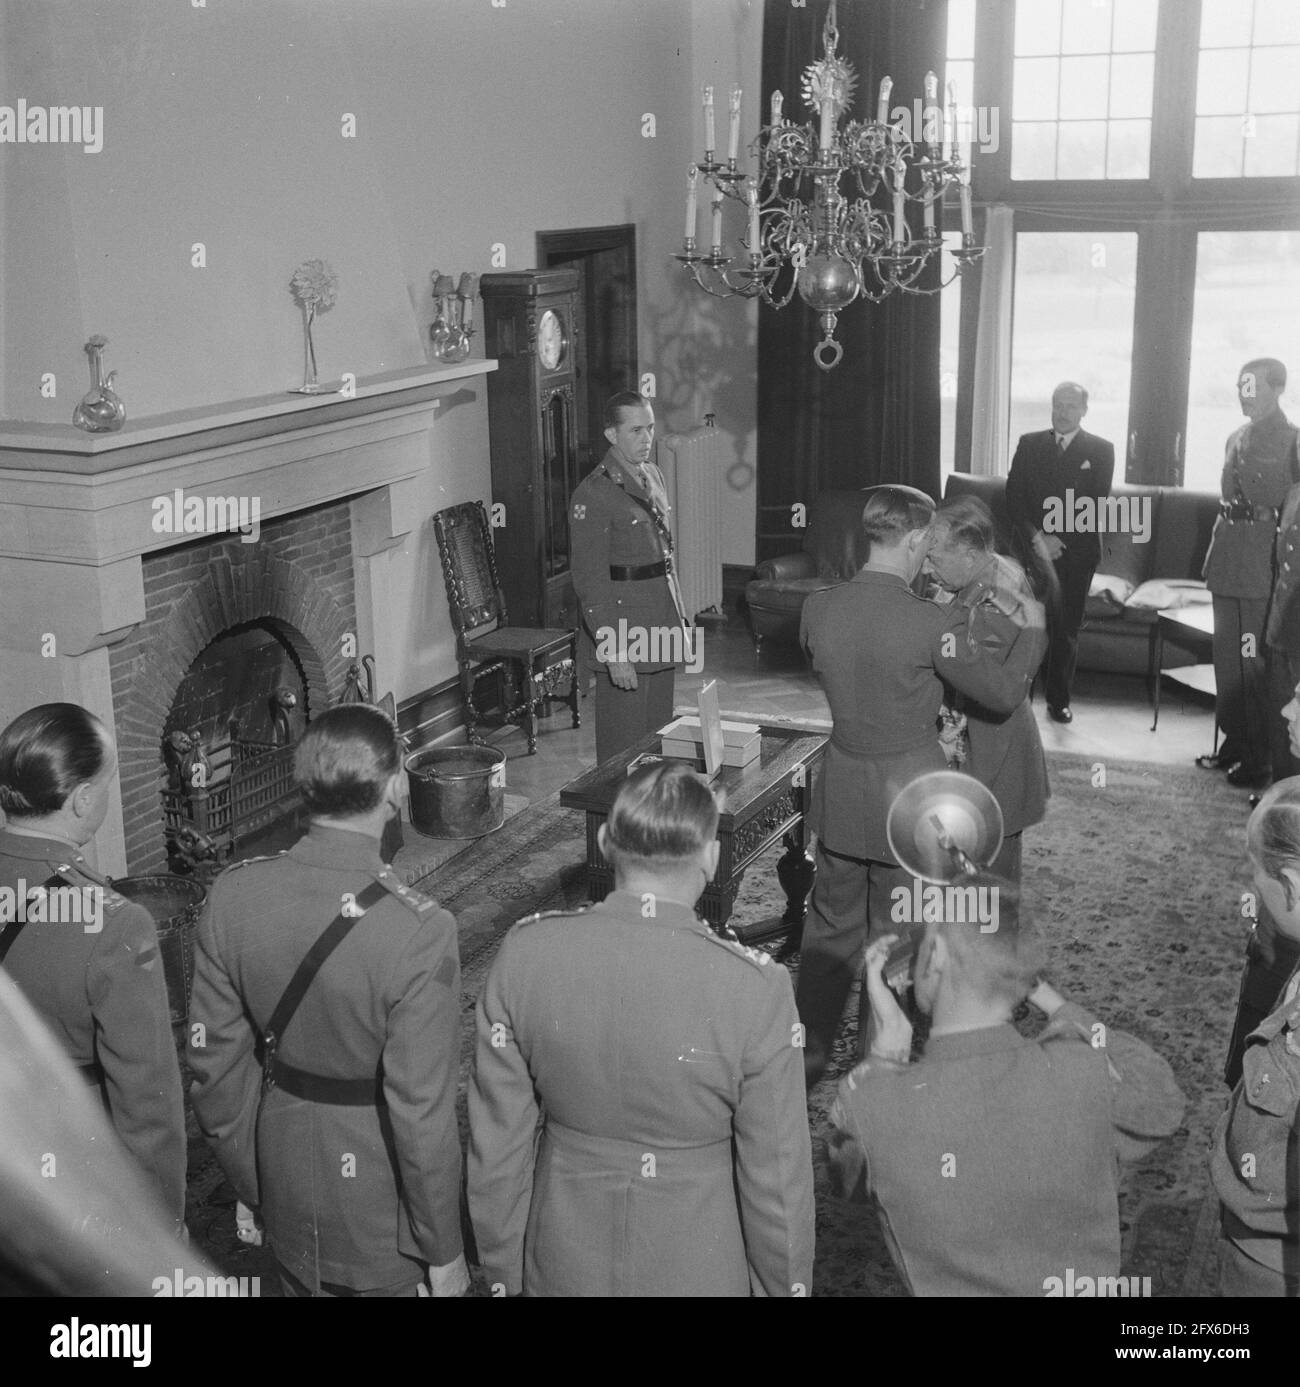 Prince Bernhard presents the Grand Cross in the Order of Orange-Nassau with Swords to Canadian General Crerar, July 20, 1945, military, awards, princes, The Netherlands, 20th century press agency photo, news to remember, documentary, historic photography 1945-1990, visual stories, human history of the Twentieth Century, capturing moments in time Stock Photo